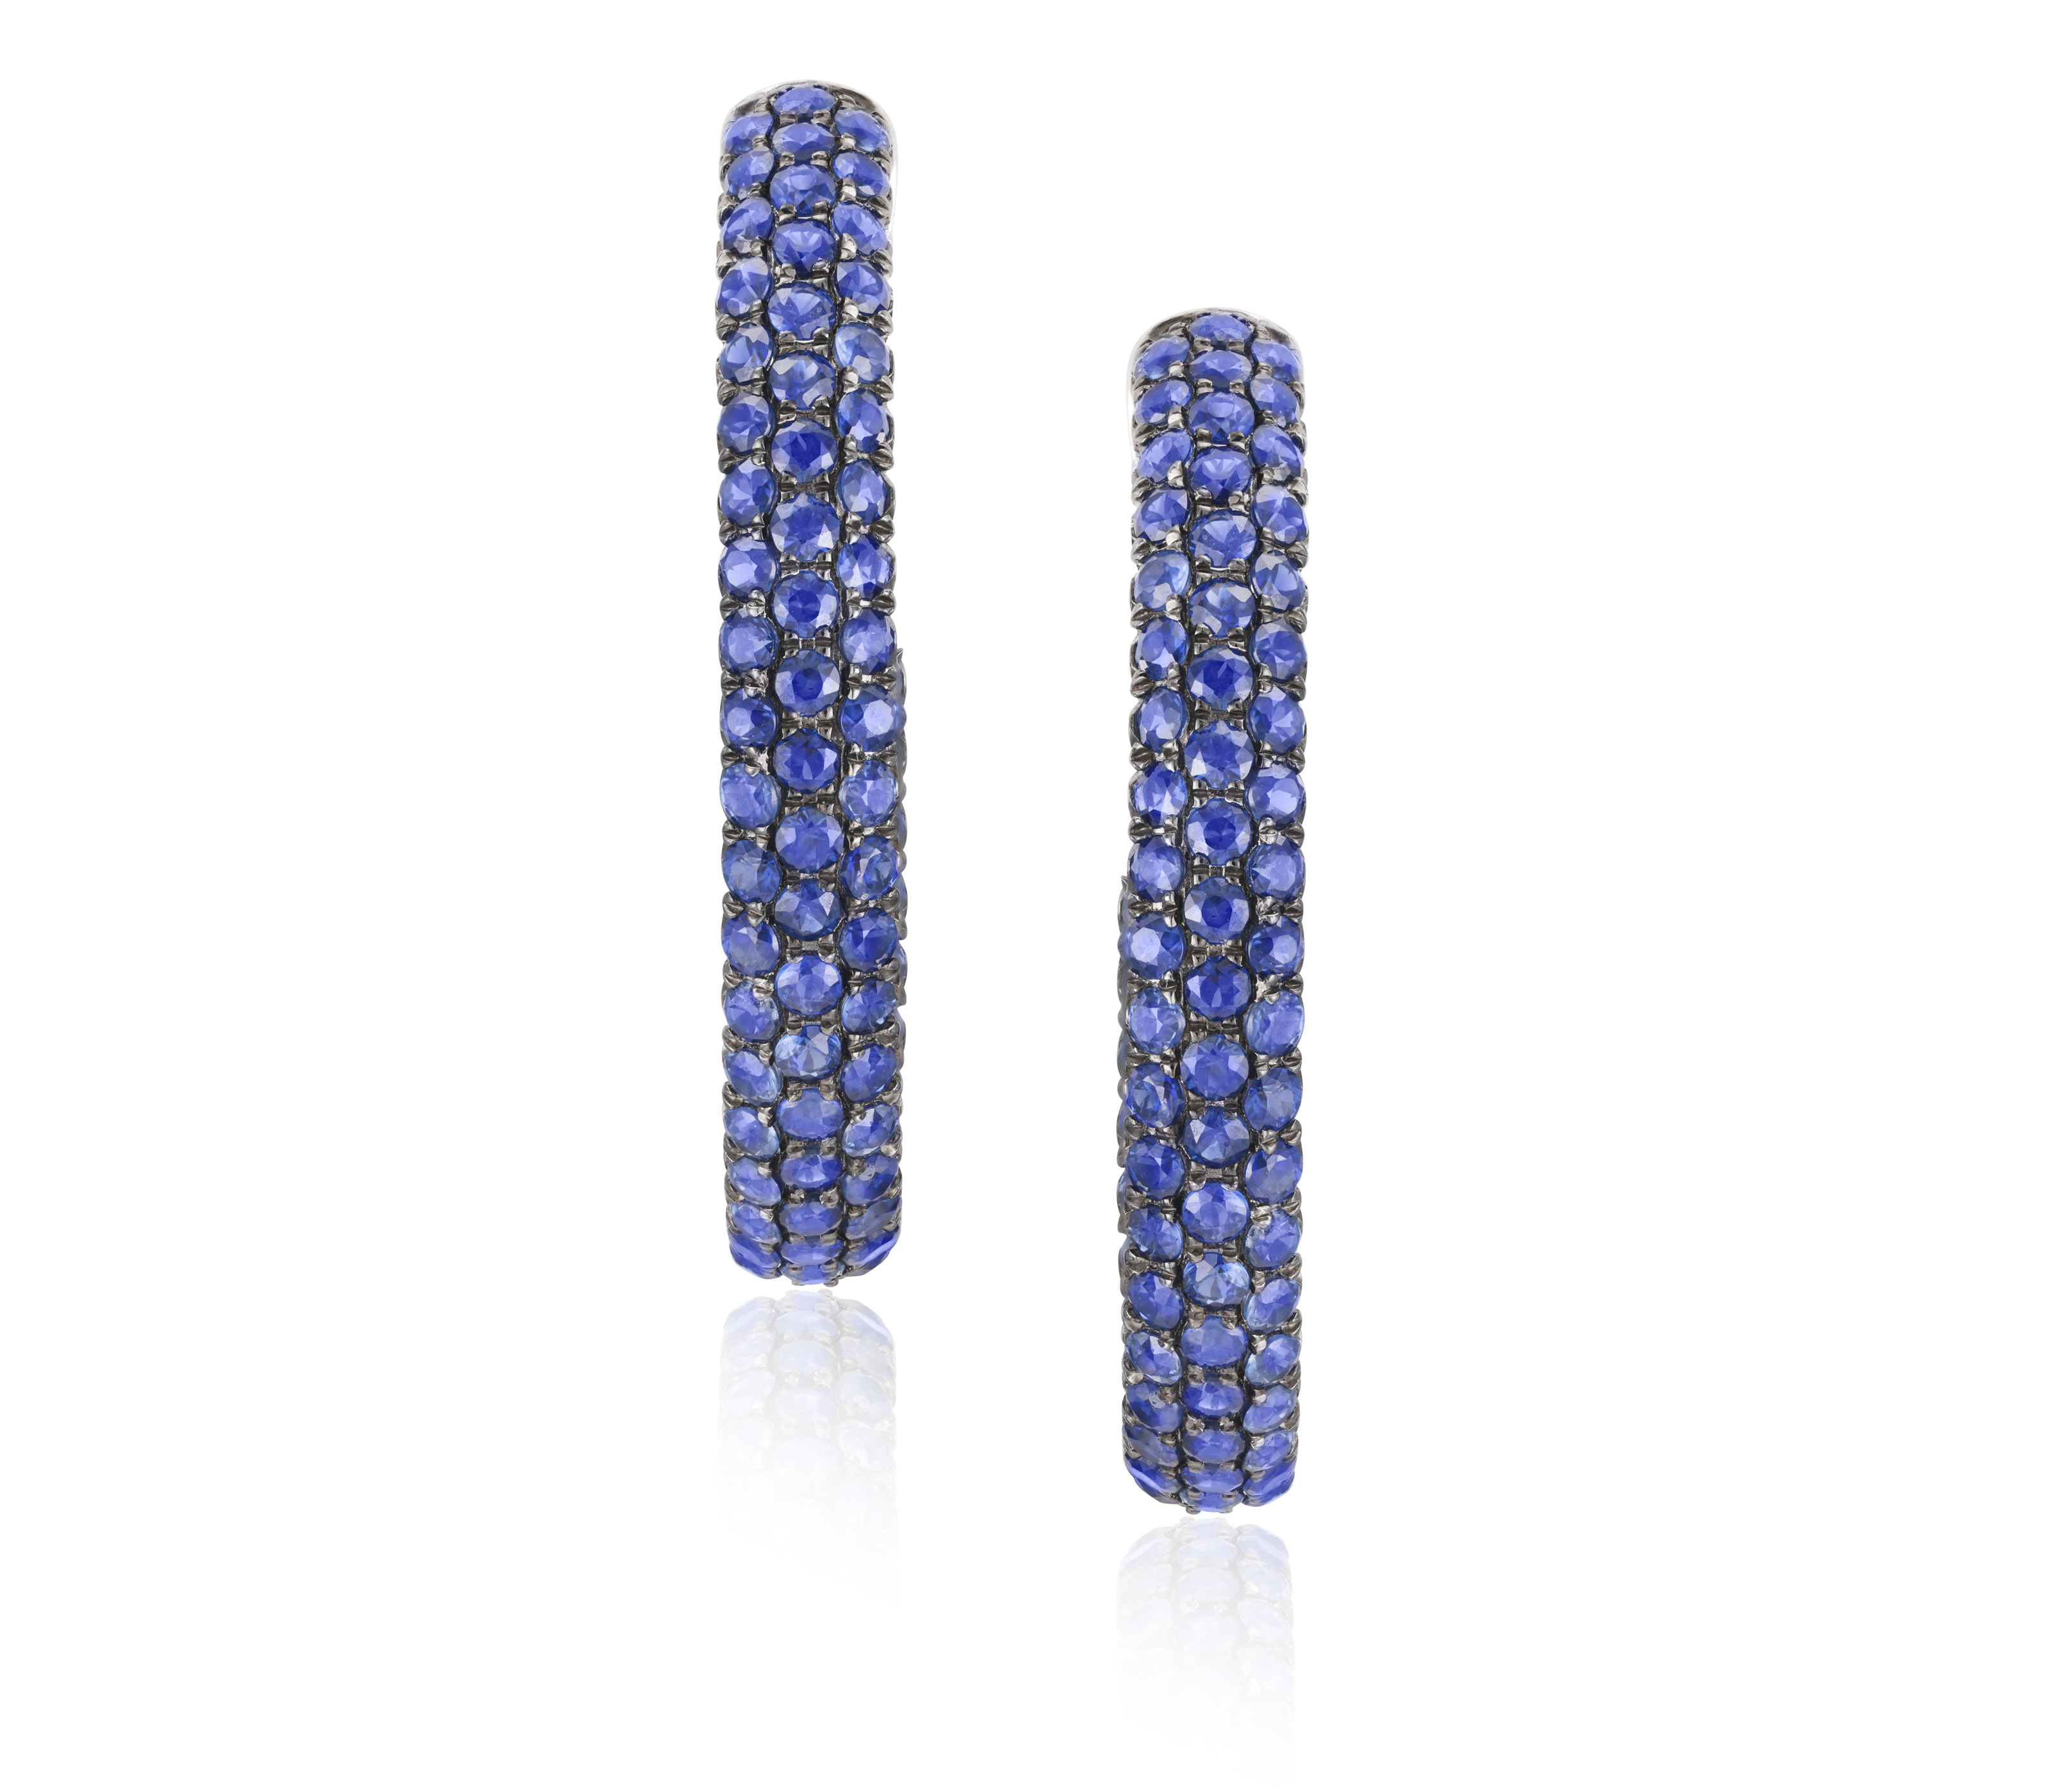 A PAIR OF SAPPHIRE HOOP EARRINGS Each pavé-set with circular-cut sapphires, mounted in 18K gold, - Image 2 of 3